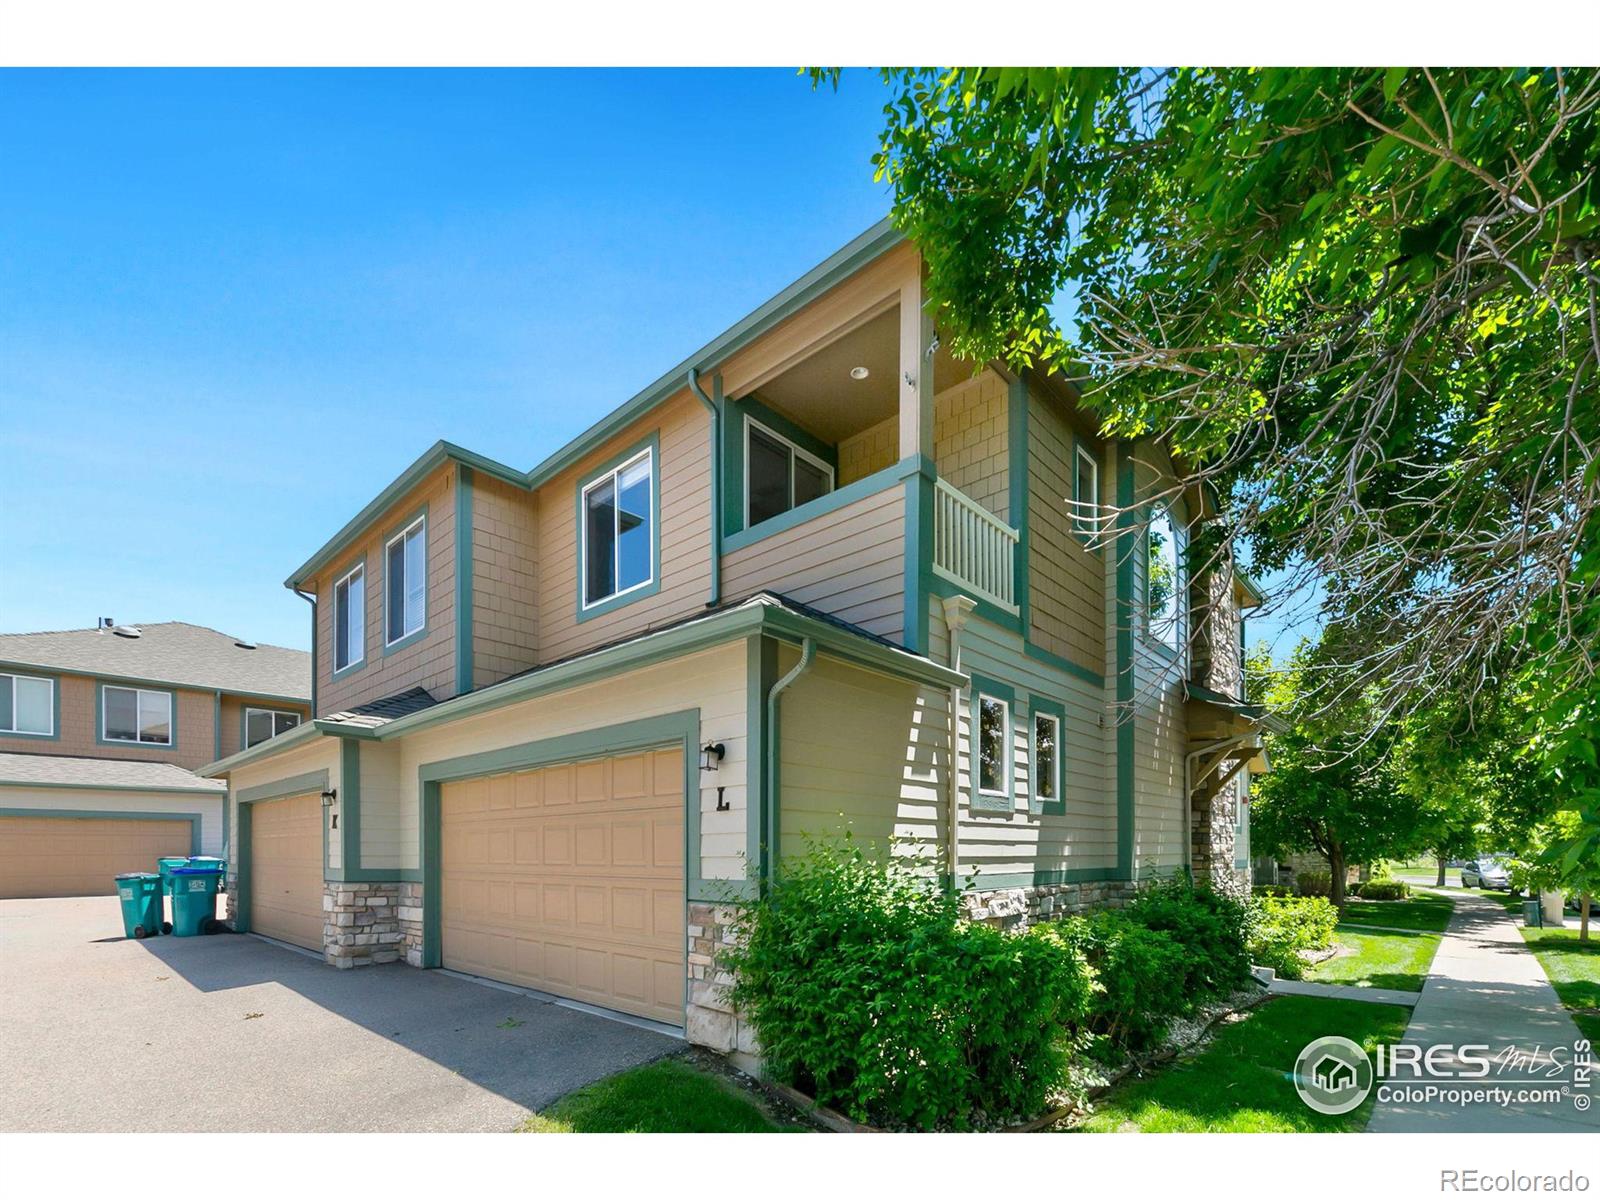 Report Image for 2862  Kansas Drive,Fort Collins, Colorado